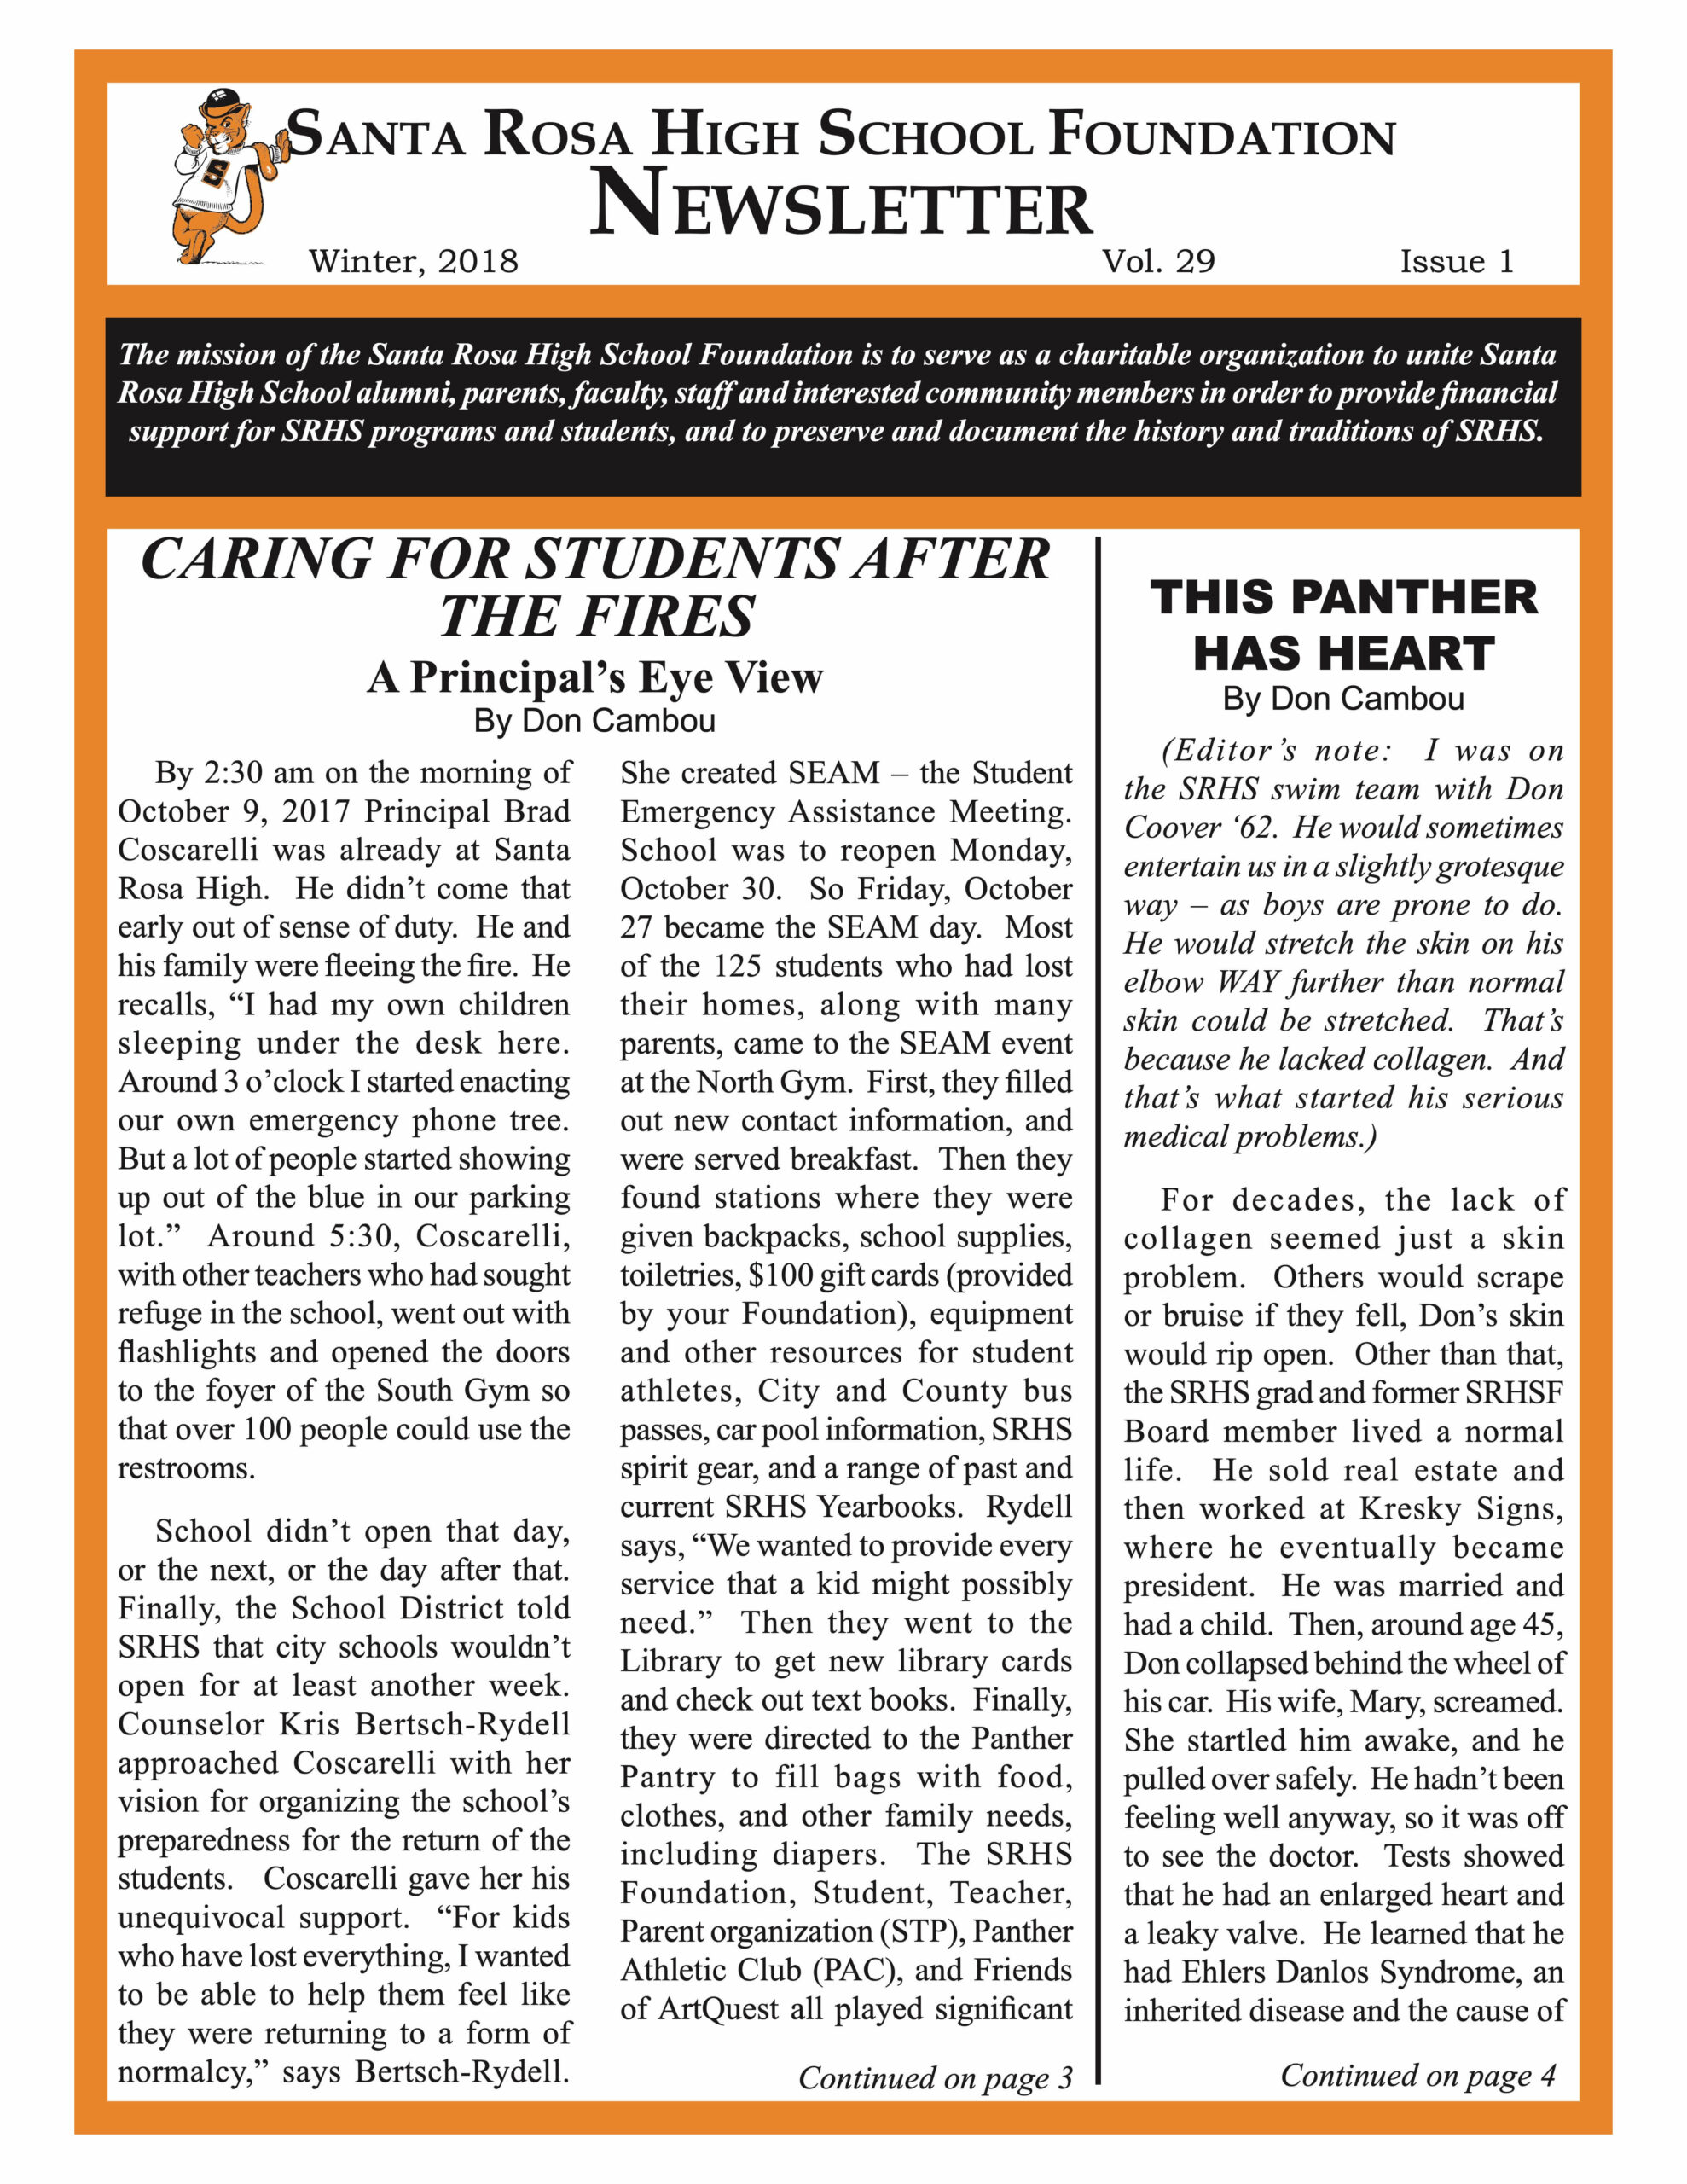 Newsletter front page - Winter 2018